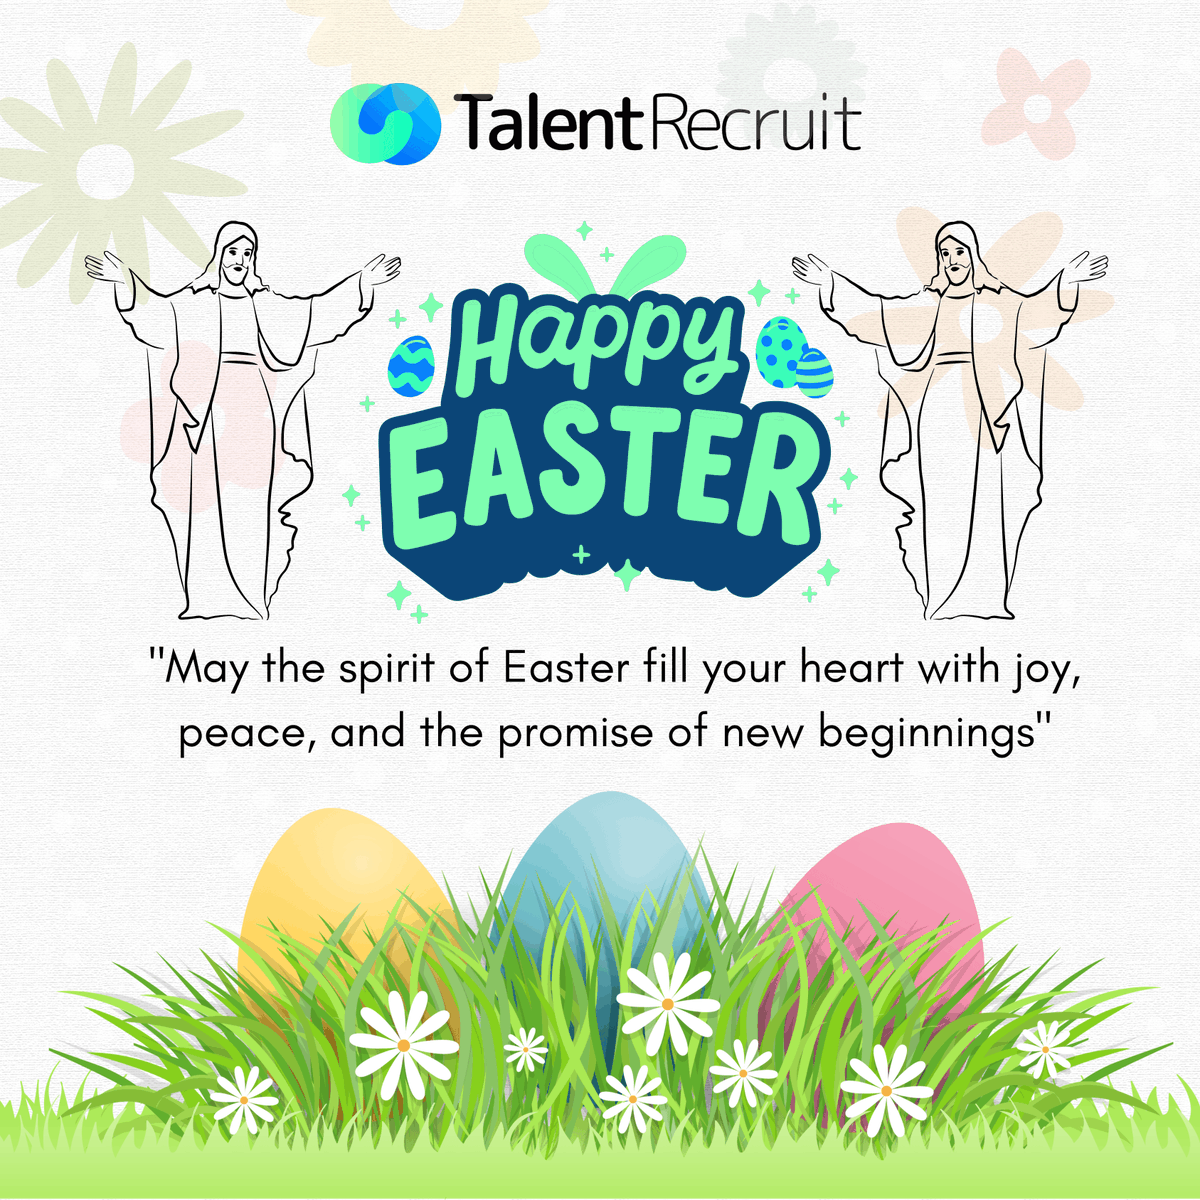 Happy Easter!

We thank our clients and partners for trusting us. We appreciate your support as we continue to offer new hiring solutions that help you locate exceptional people and expand your business
#easterday #applicanttrackingsystem #saas #hiringtech  #talentrecruit